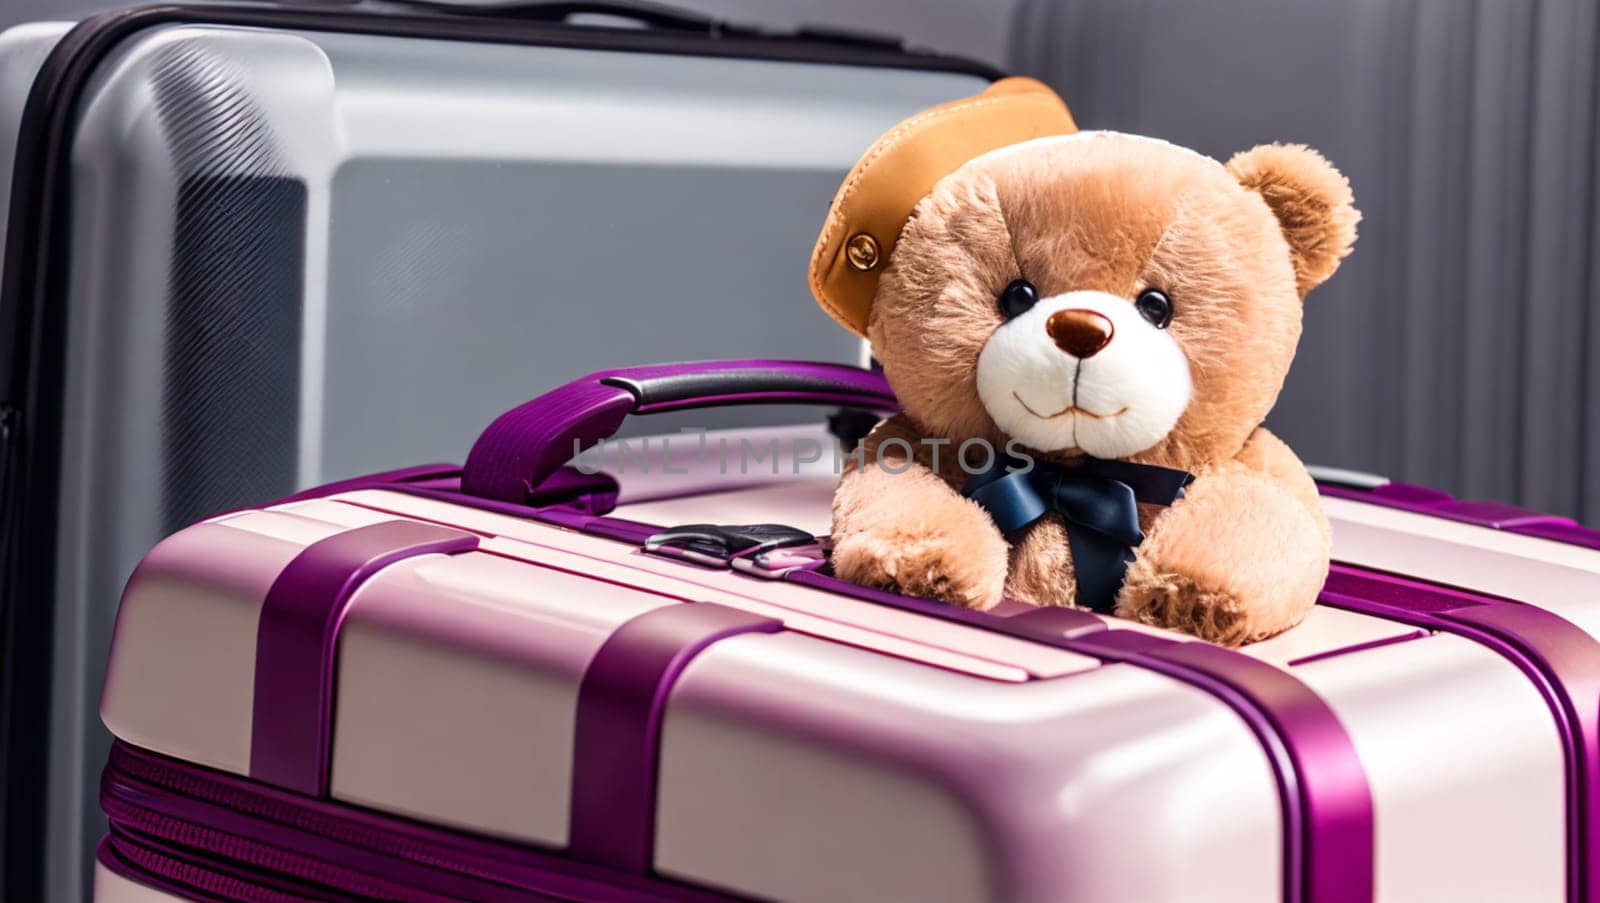 Brown teddy bear with hat next to travel suitcases. by XabiDonostia